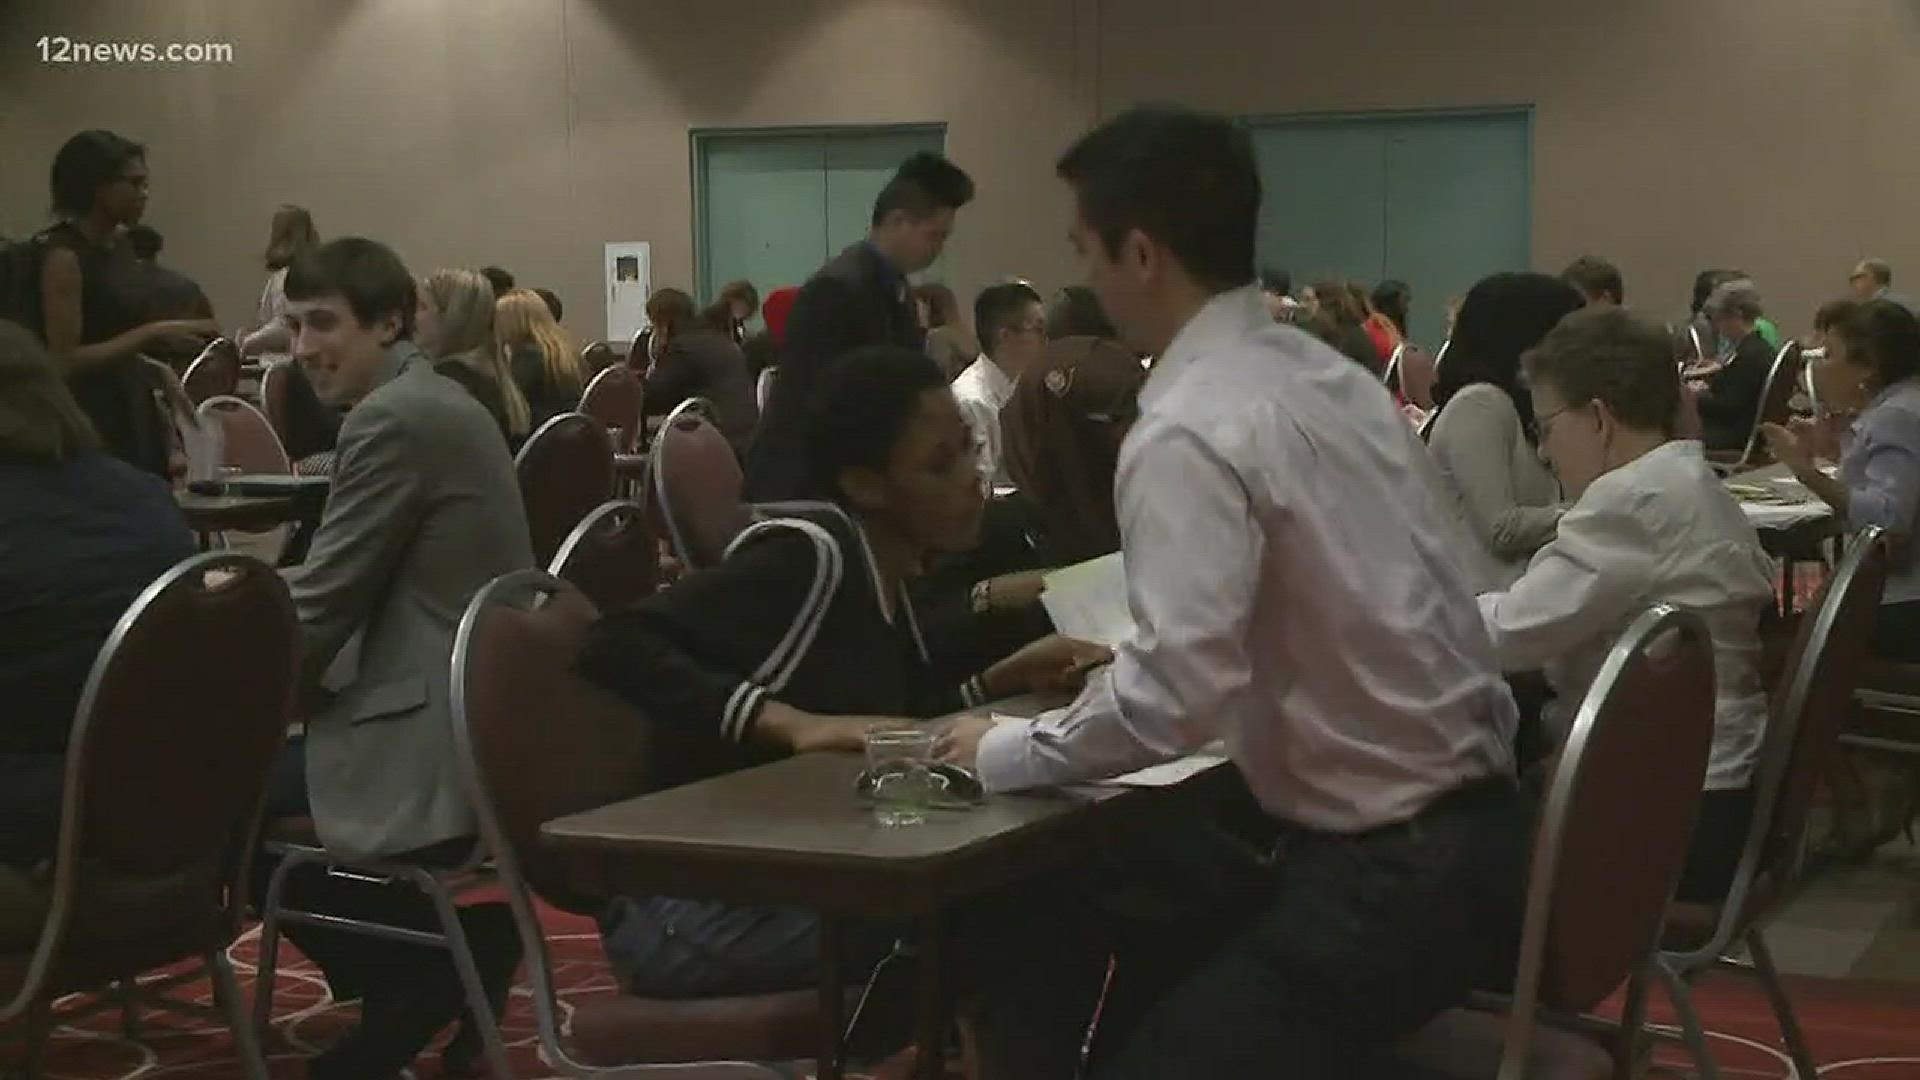 Peoria teen fair for first-time job seekers